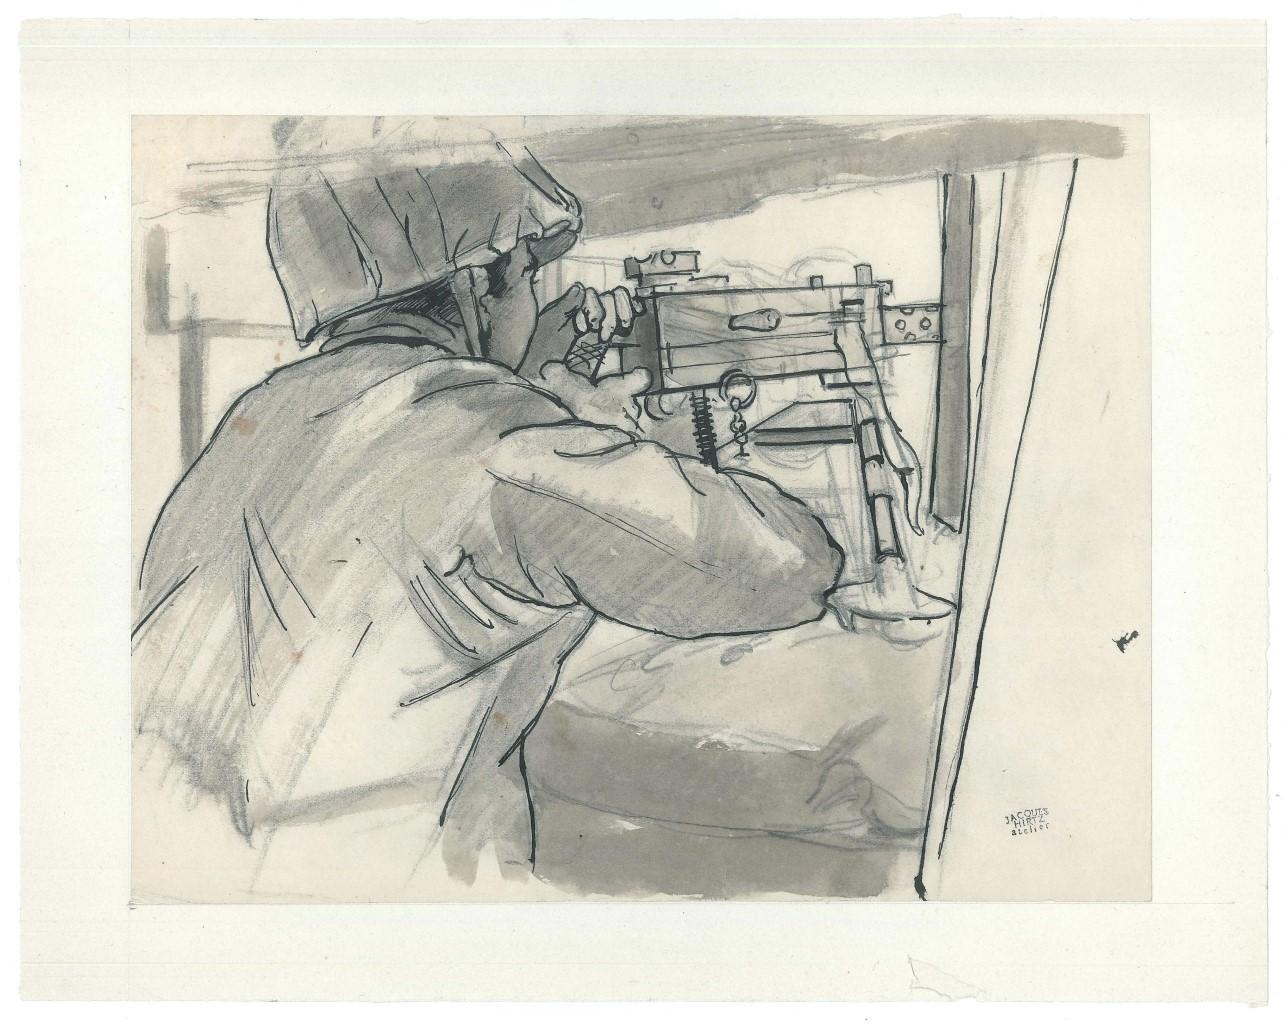 The Submachine Gun - Original Watercolored Ink by Jacques Hirtz - 20th Century